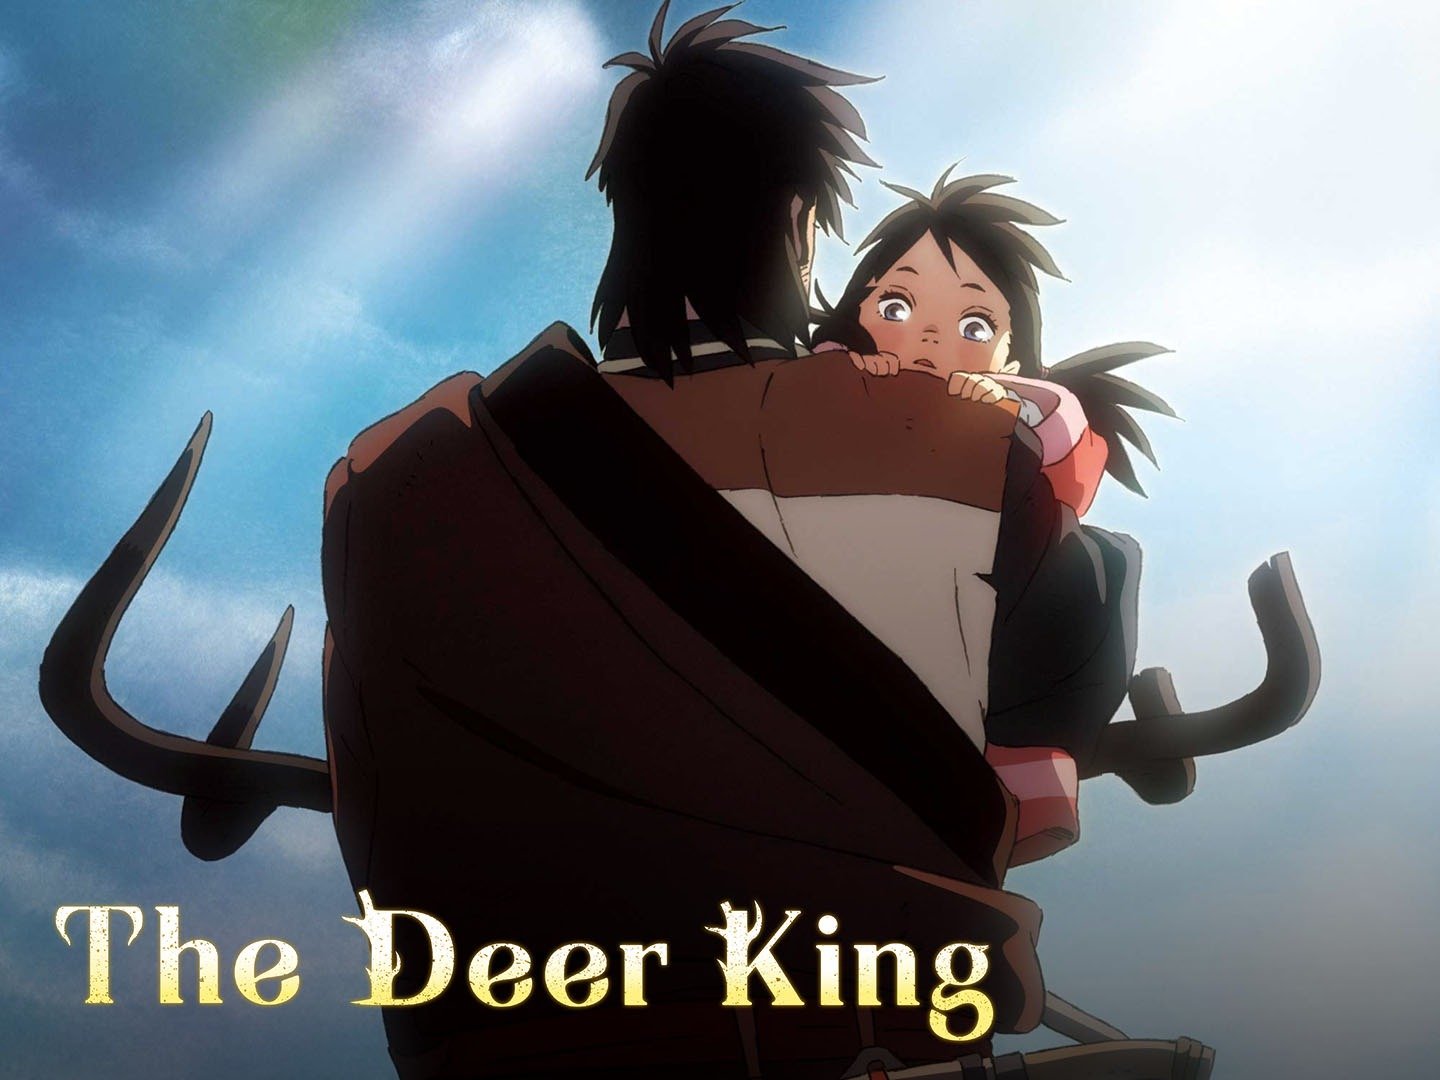 Masashi Ando and Production IGs The Deer King Licensed by GKIDS